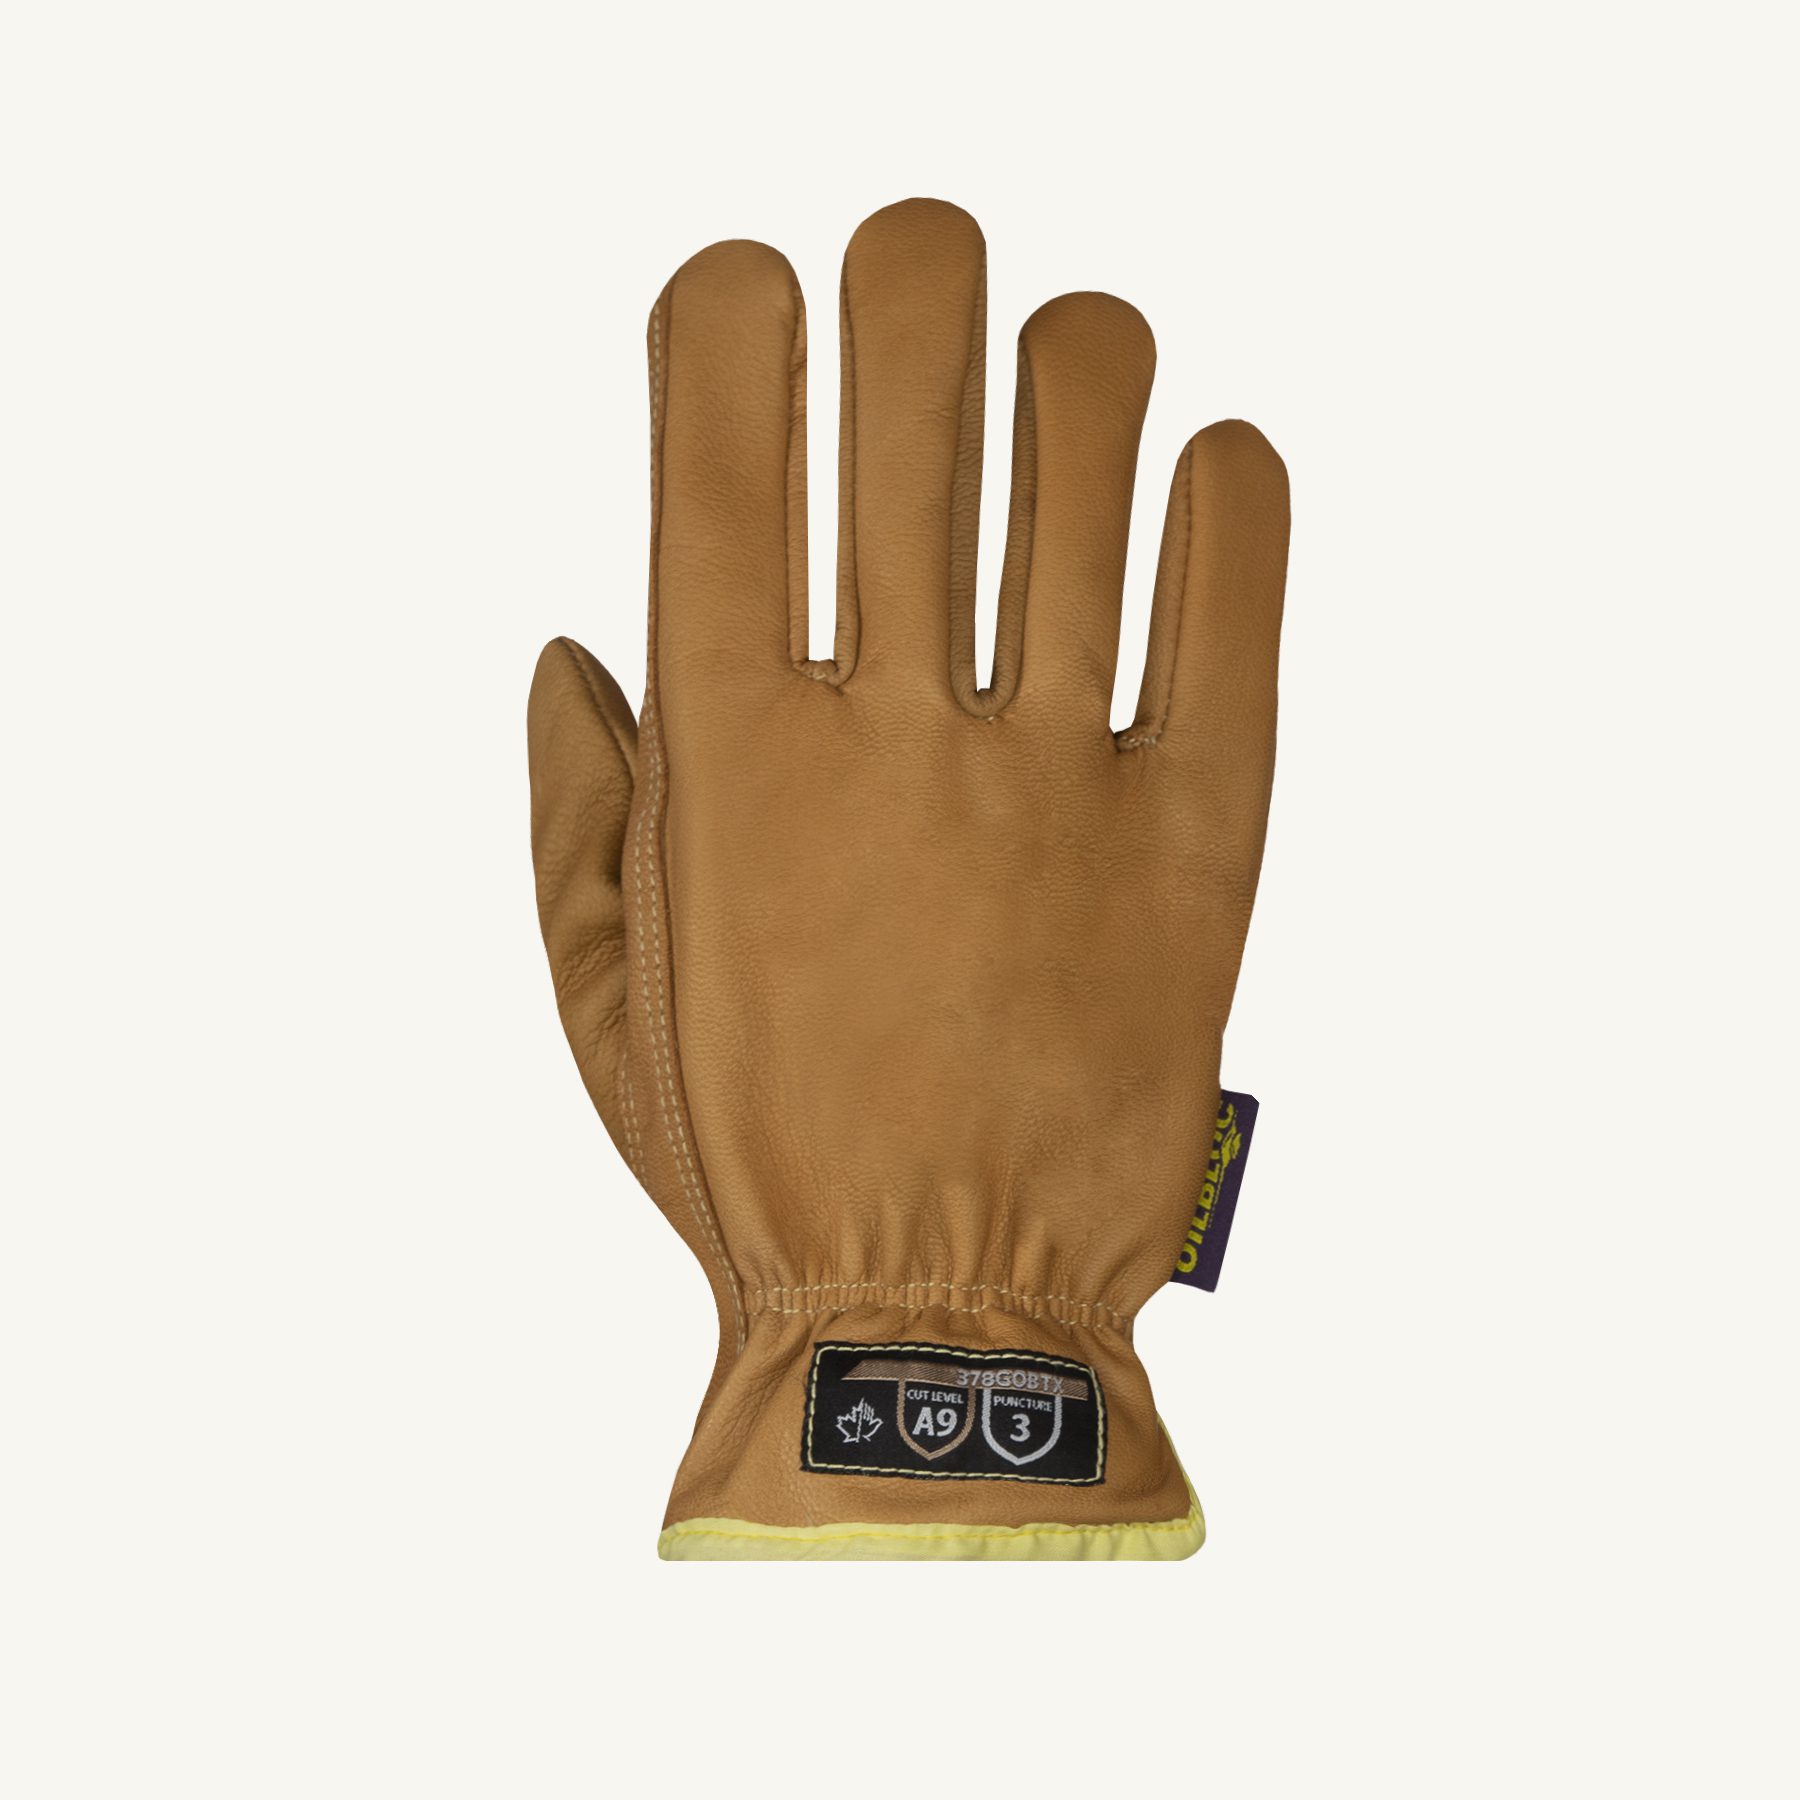 Superior Glove Works STACXPNRT-8 Cut-Resistant Coated & Dipped Gl